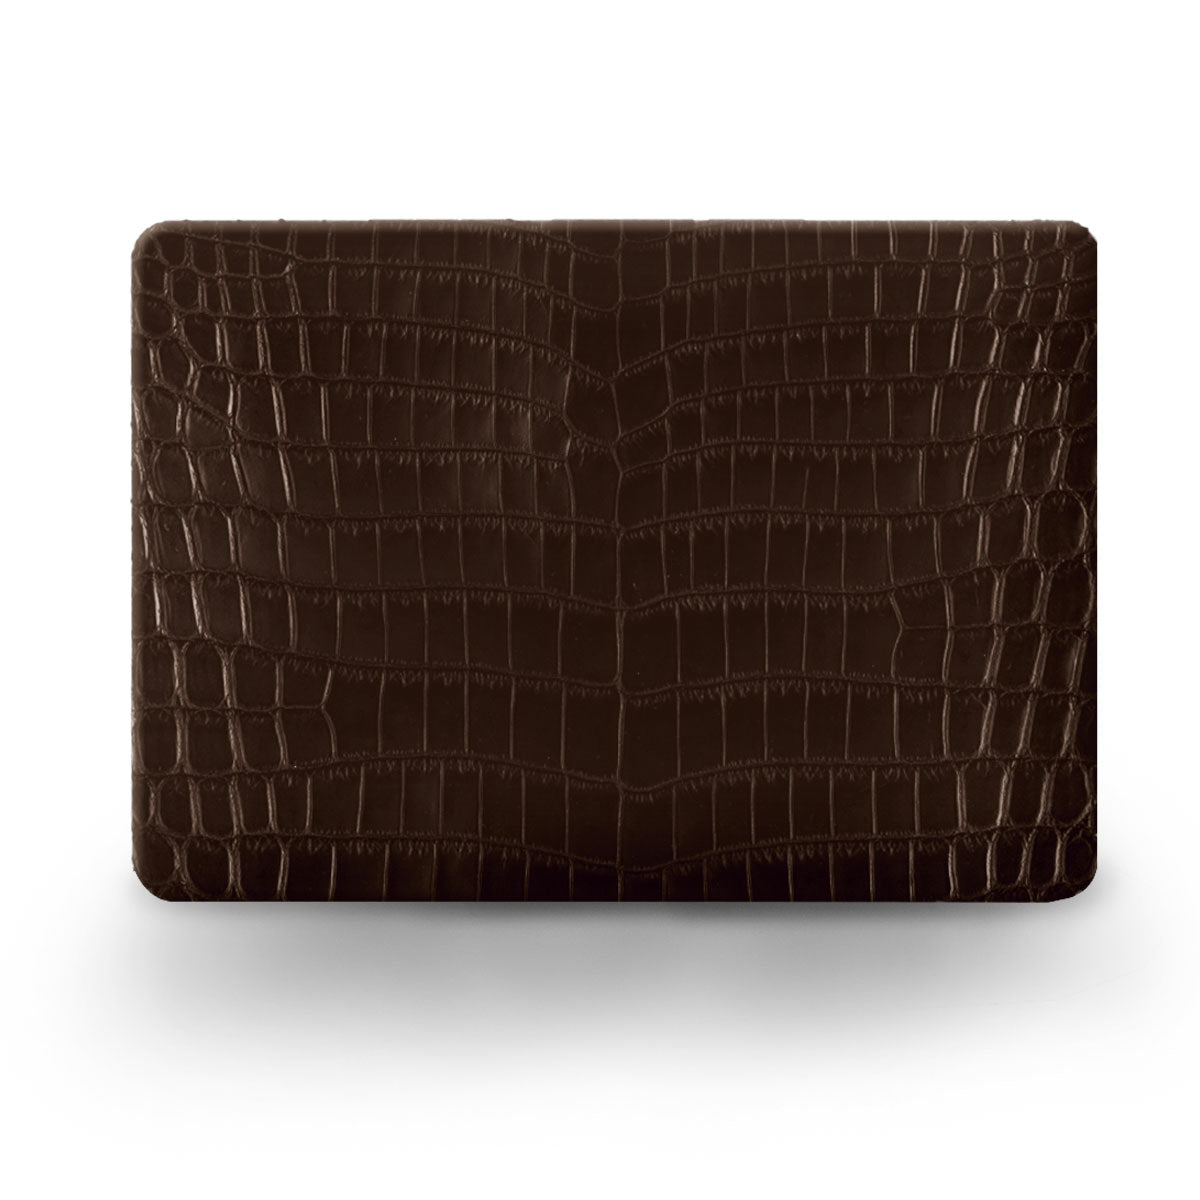 Leather iPad case / back cover - Macbook Pro & Air (13, 14, 15 and 16 inches) - Genuine alligator